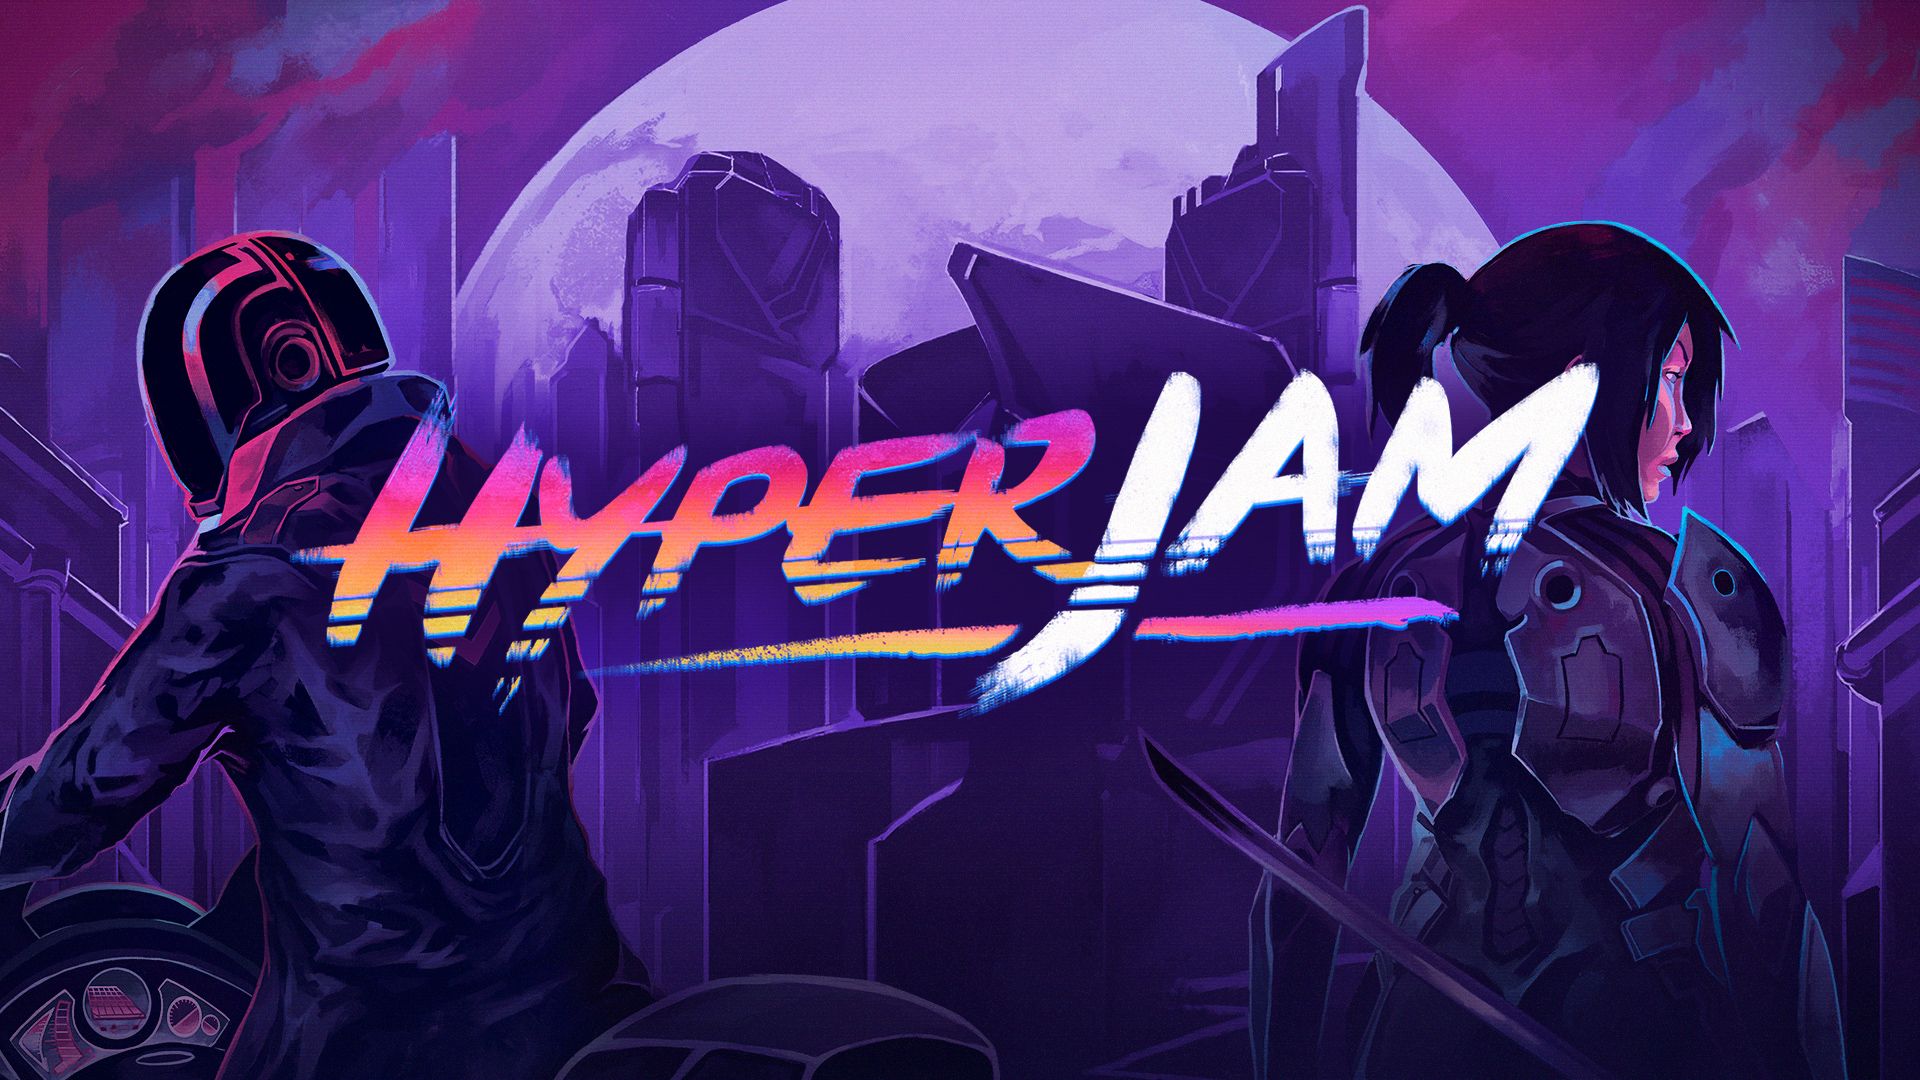 Hyper Jam is a Neon Arena Brawler and it's Coming to PS Xbox One, and PC on February 12